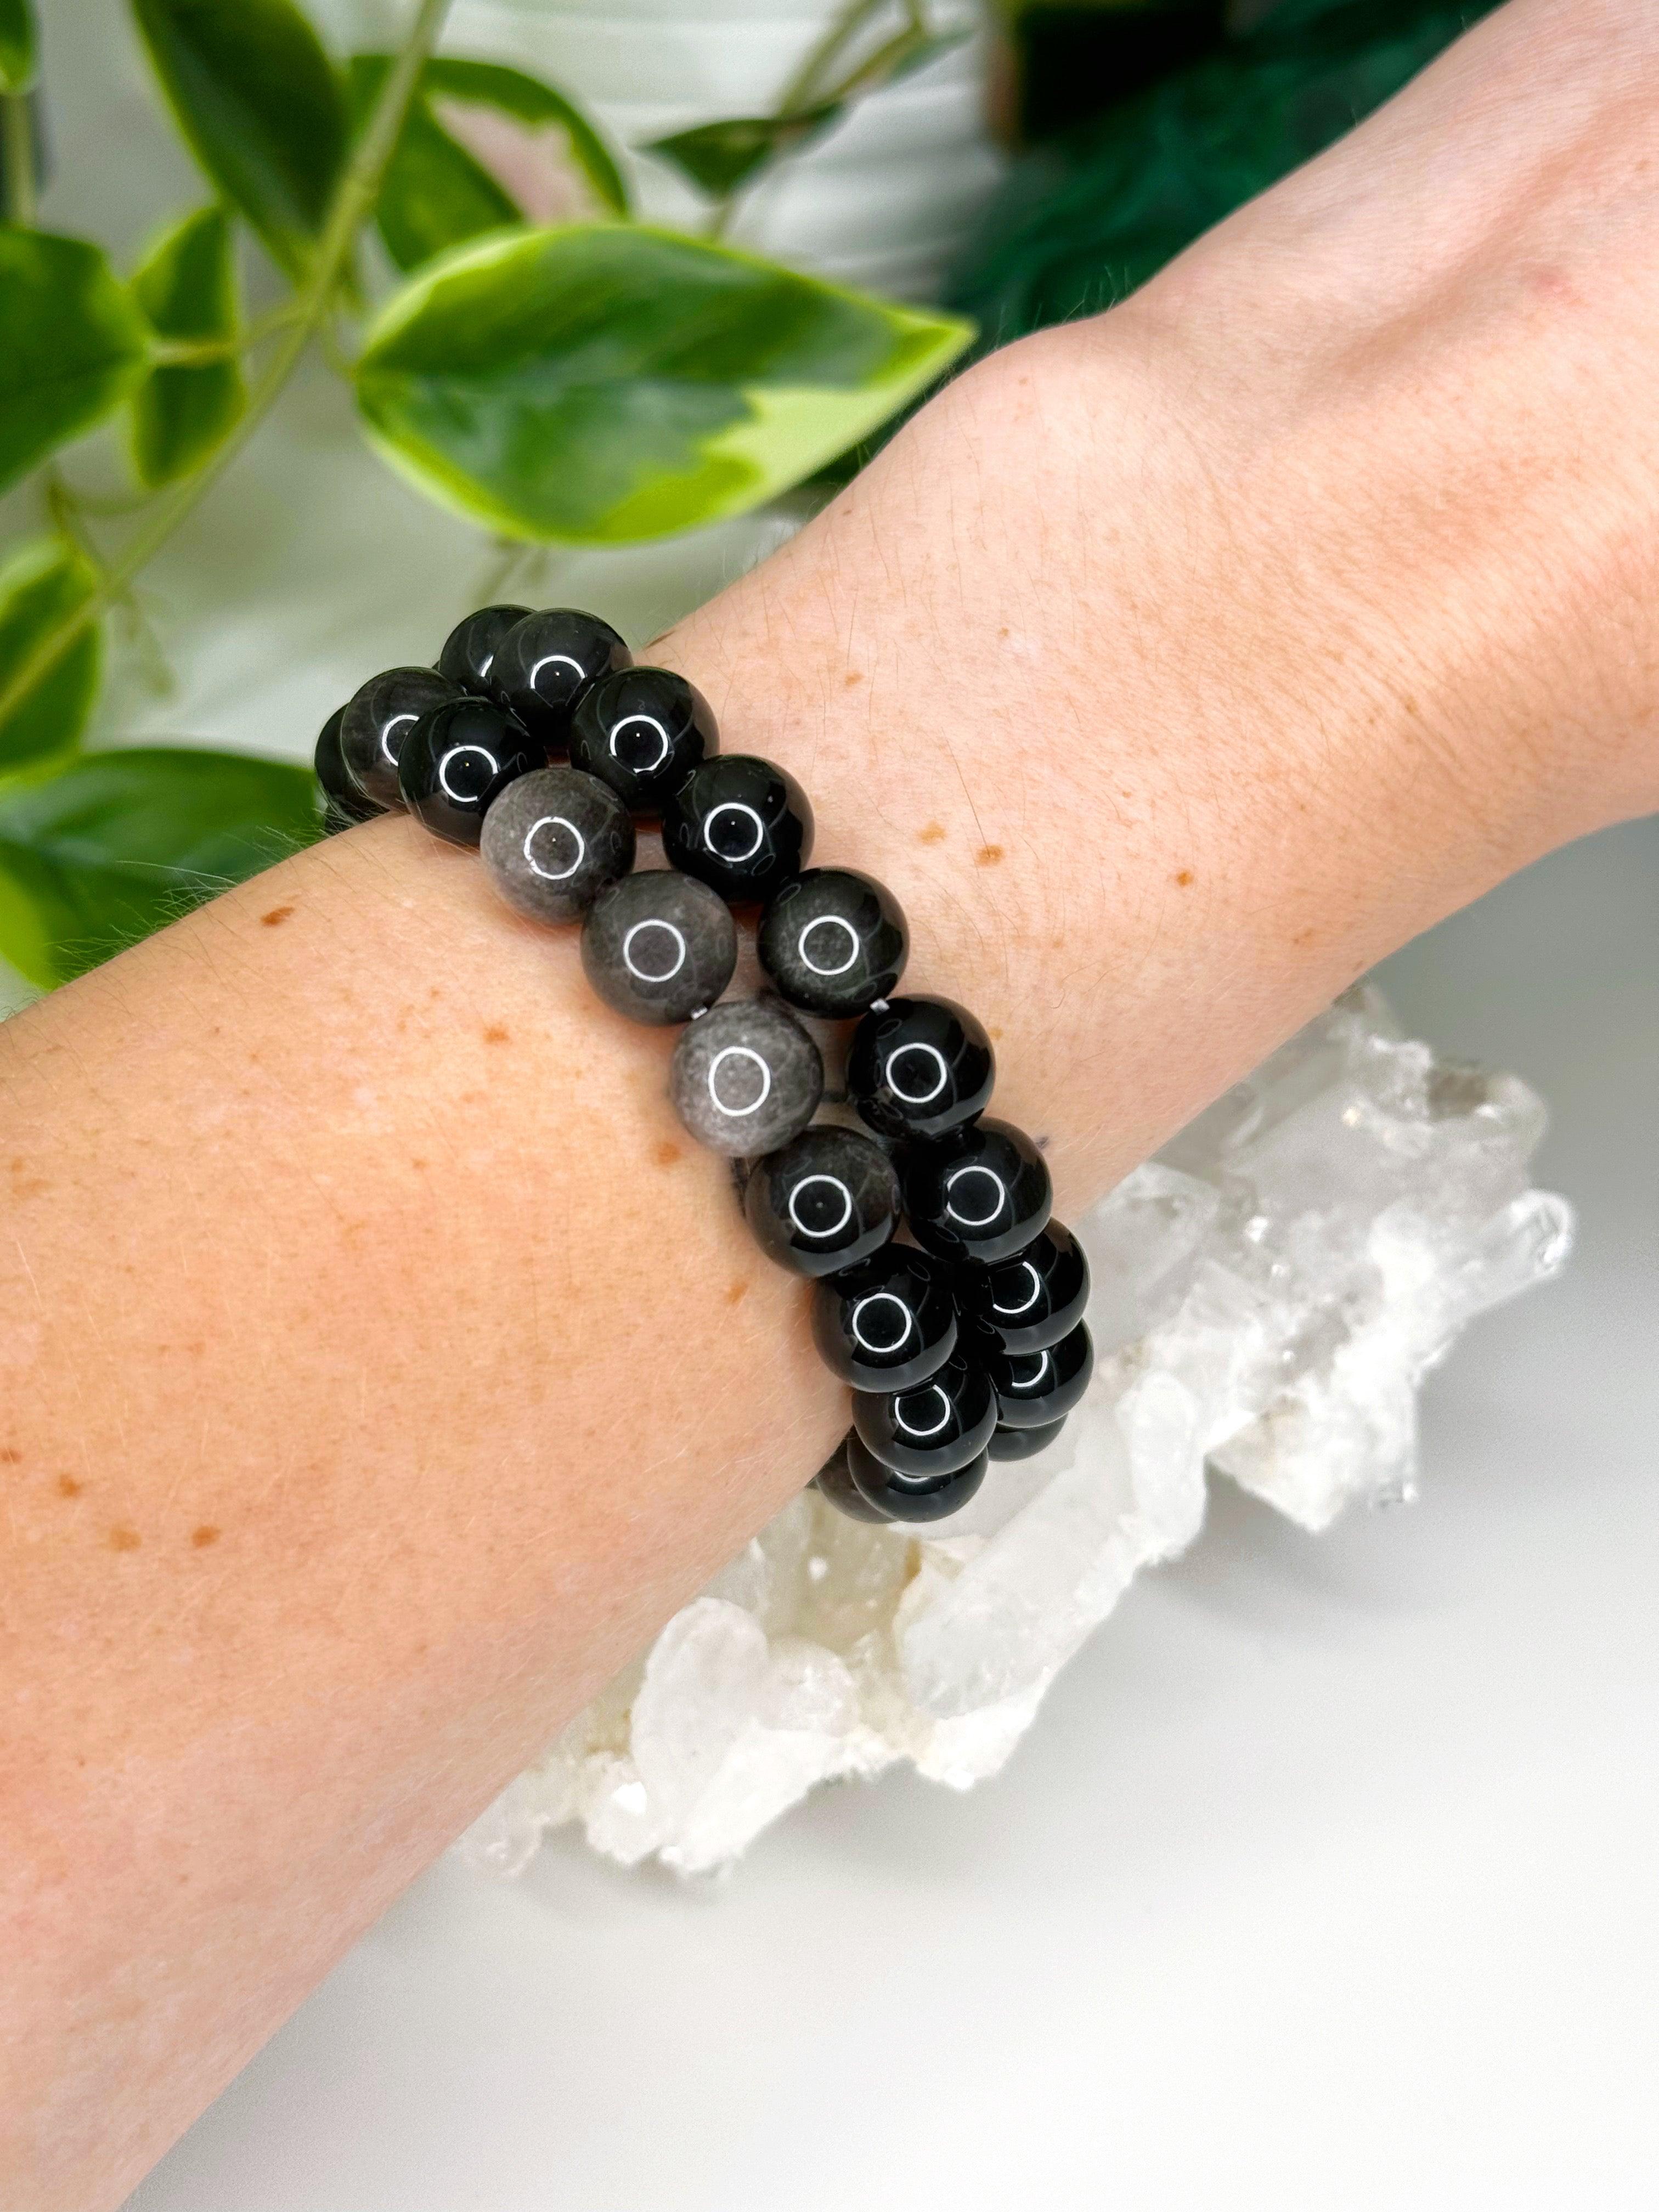 SILVER SHEEN OBSIDIAN 10mm - HANDMADE CRYSTAL BRACELET - 10mm, black, bracelet, crystal bracelet, Friday the 13th, handmade bracelet, jewelry, market bracelet, obsidian, protection gift bundle, recently added, Scorpio Season, silver sheen obsidian, Wearable - The Mineral Maven